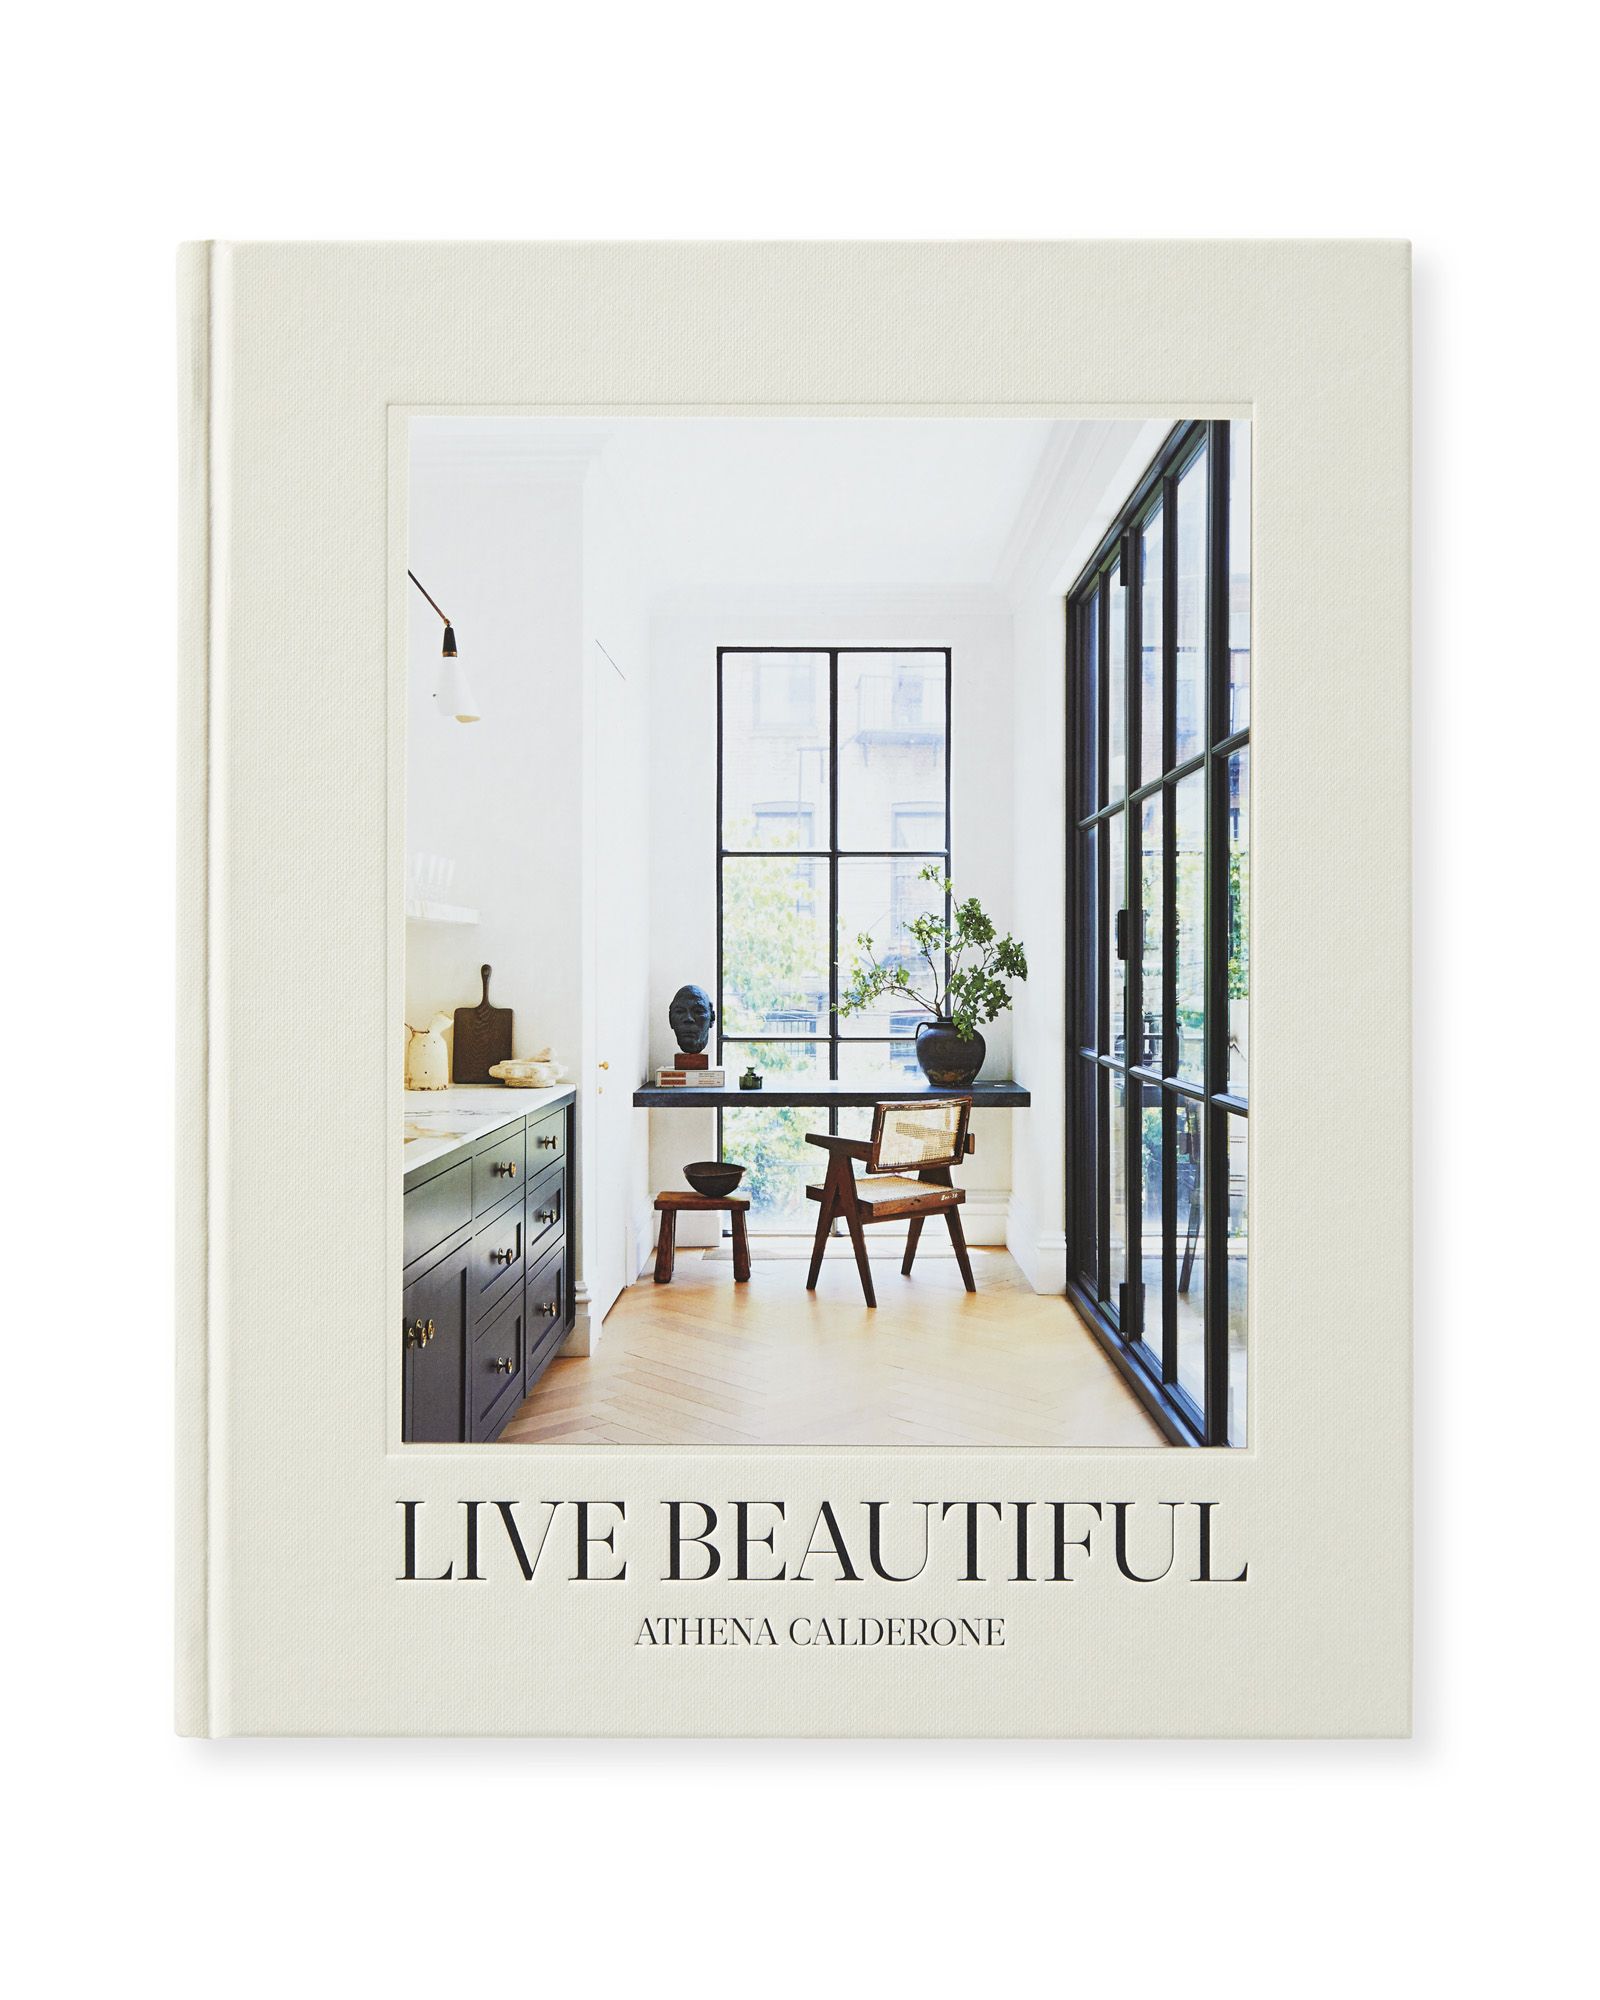 “Live Beautiful” by Athena Calderone | Serena and Lily